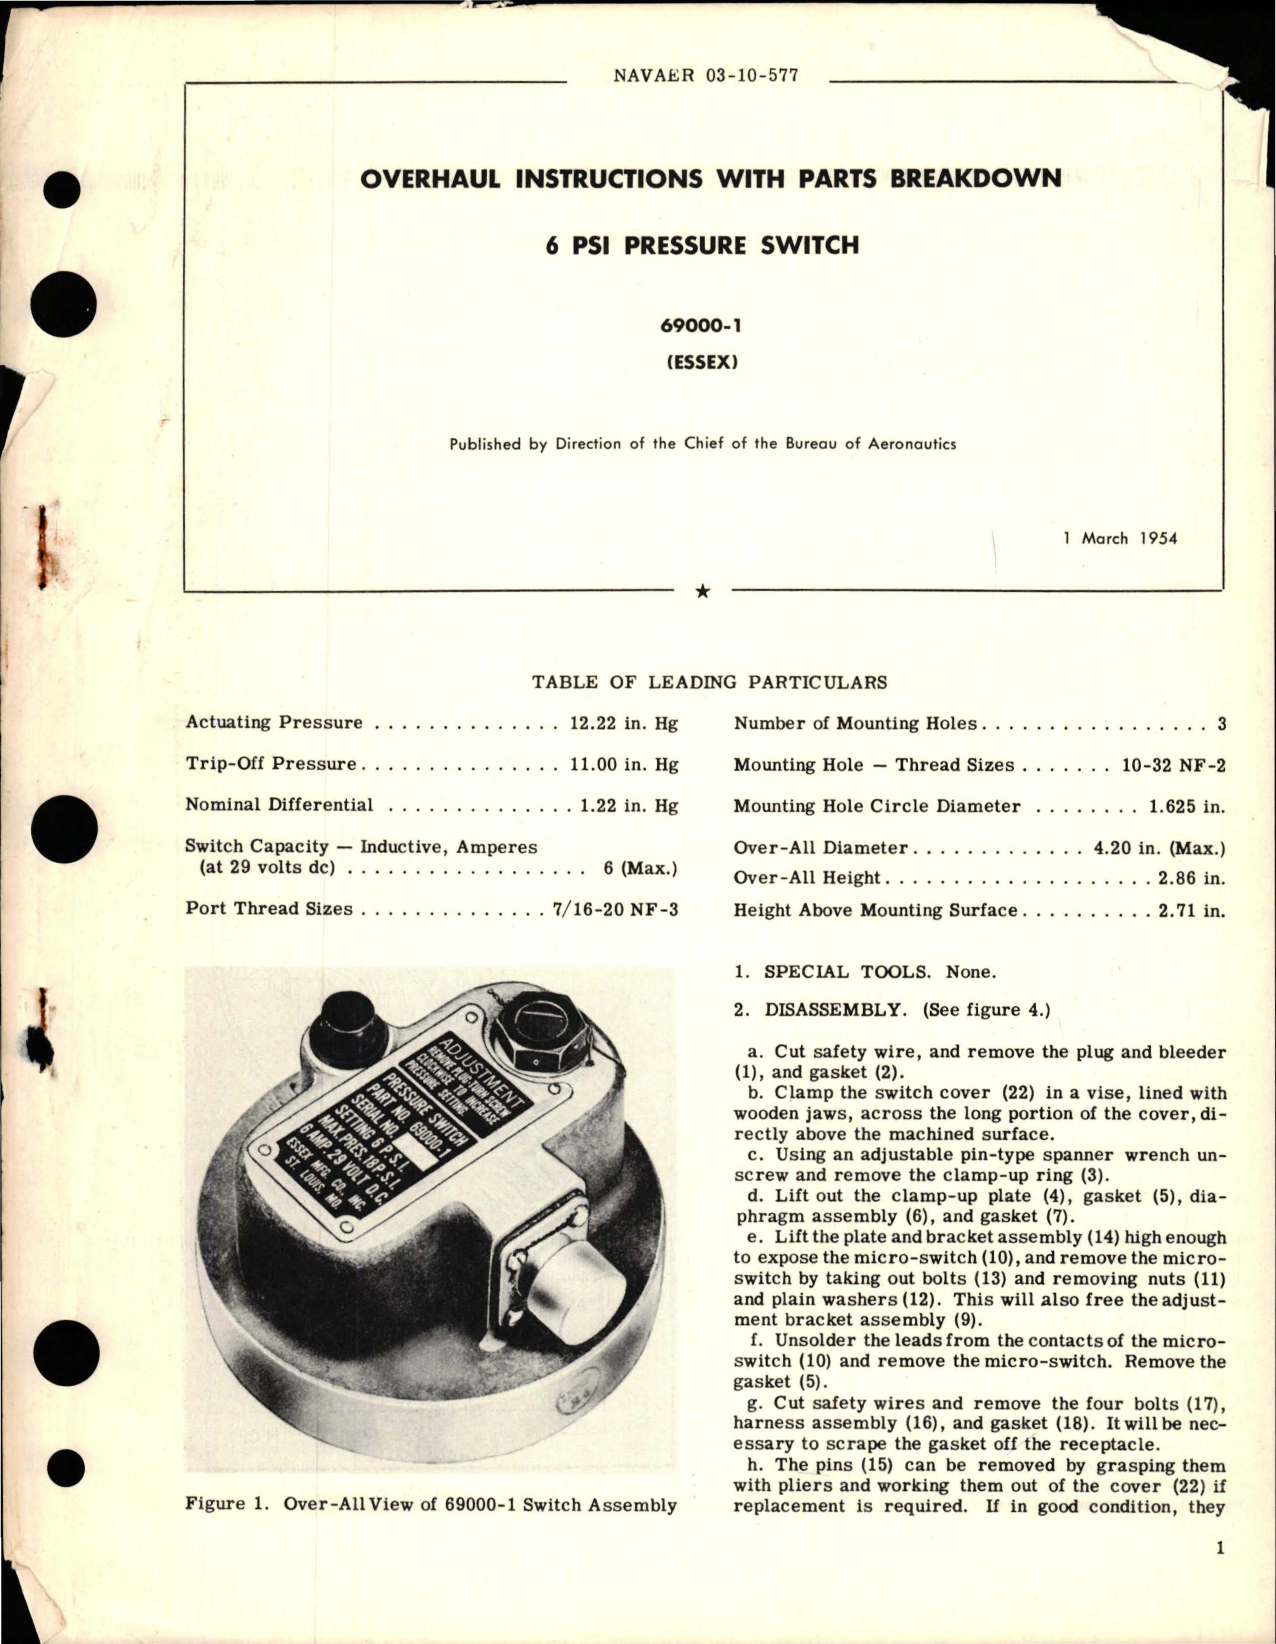 Sample page 1 from AirCorps Library document: Overhaul Instructions with Parts Breakdown for Pressure Switch 6 PSI - 69000-1